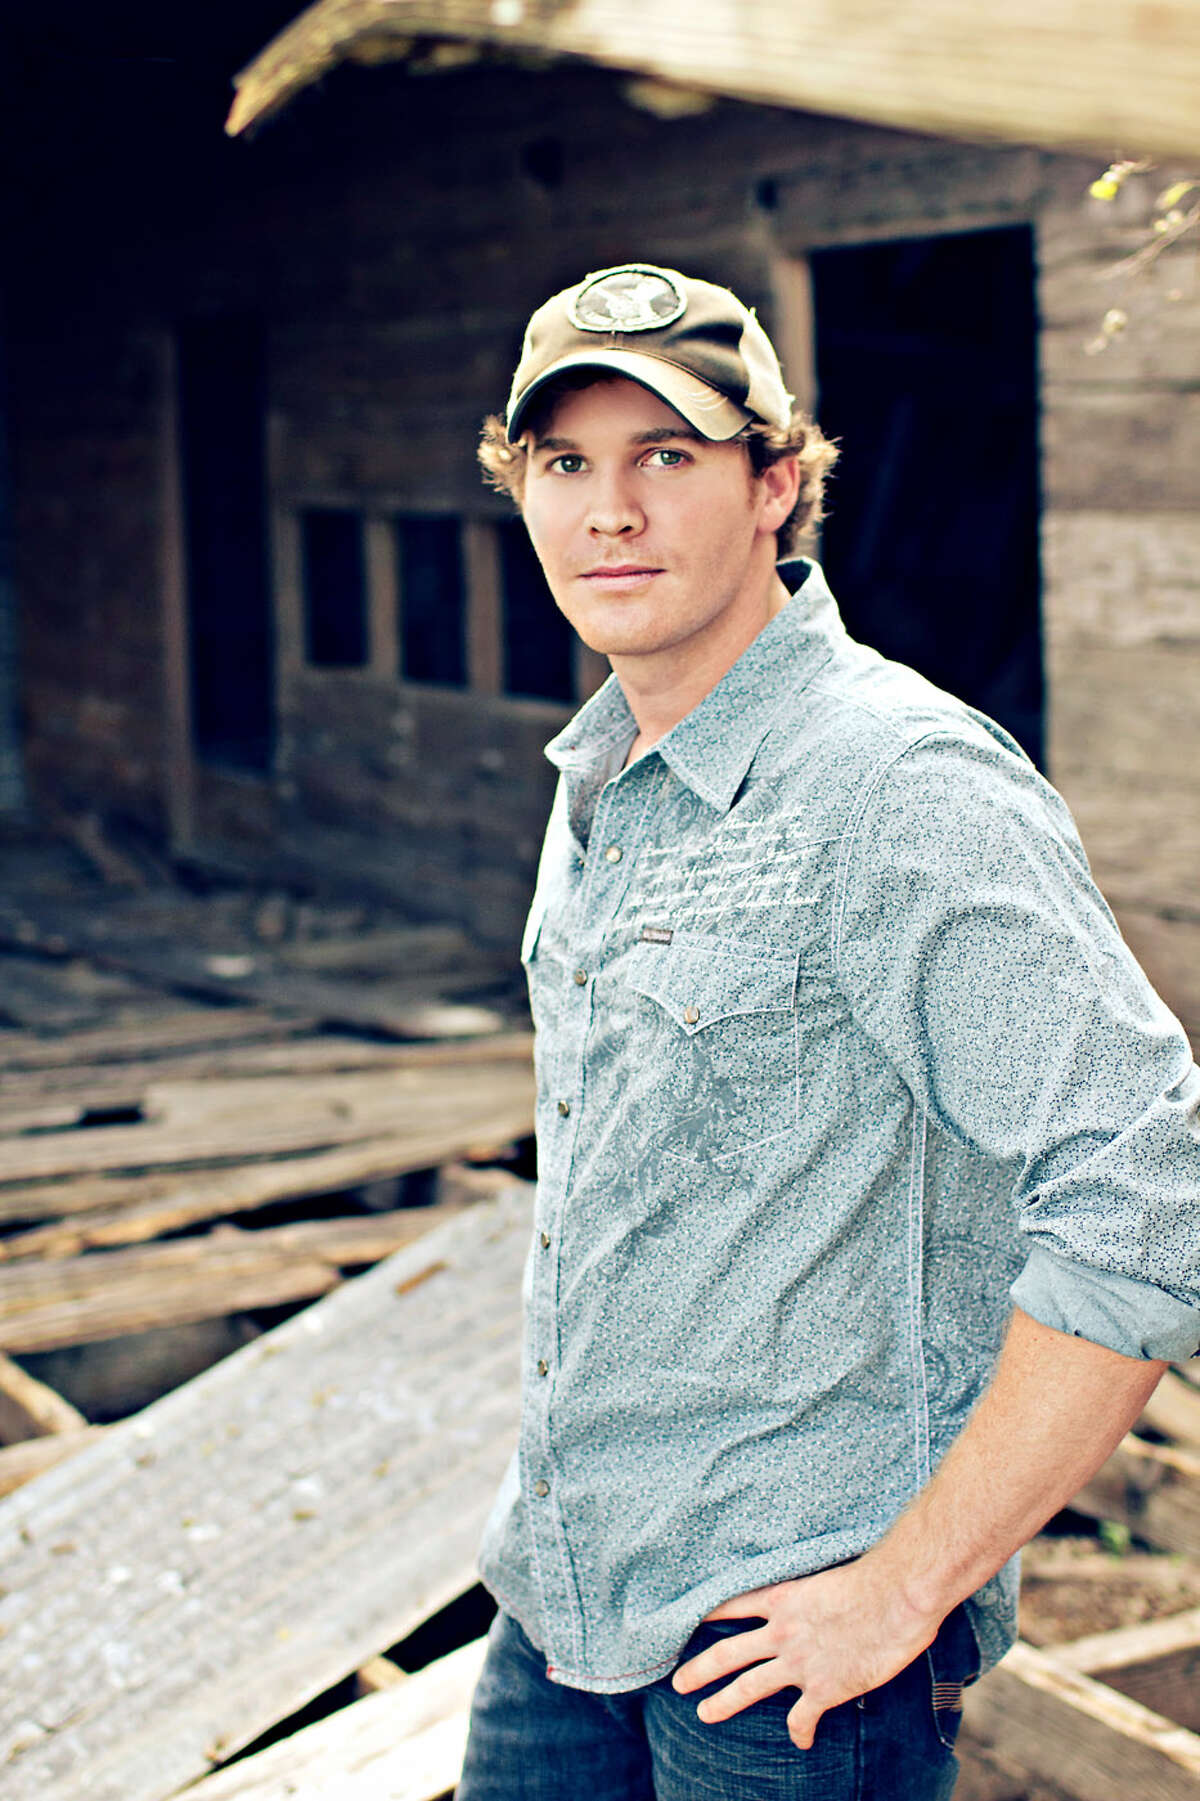 Curtis Grimes is a 26 year old singer/songwriter from Gilmer, TX.